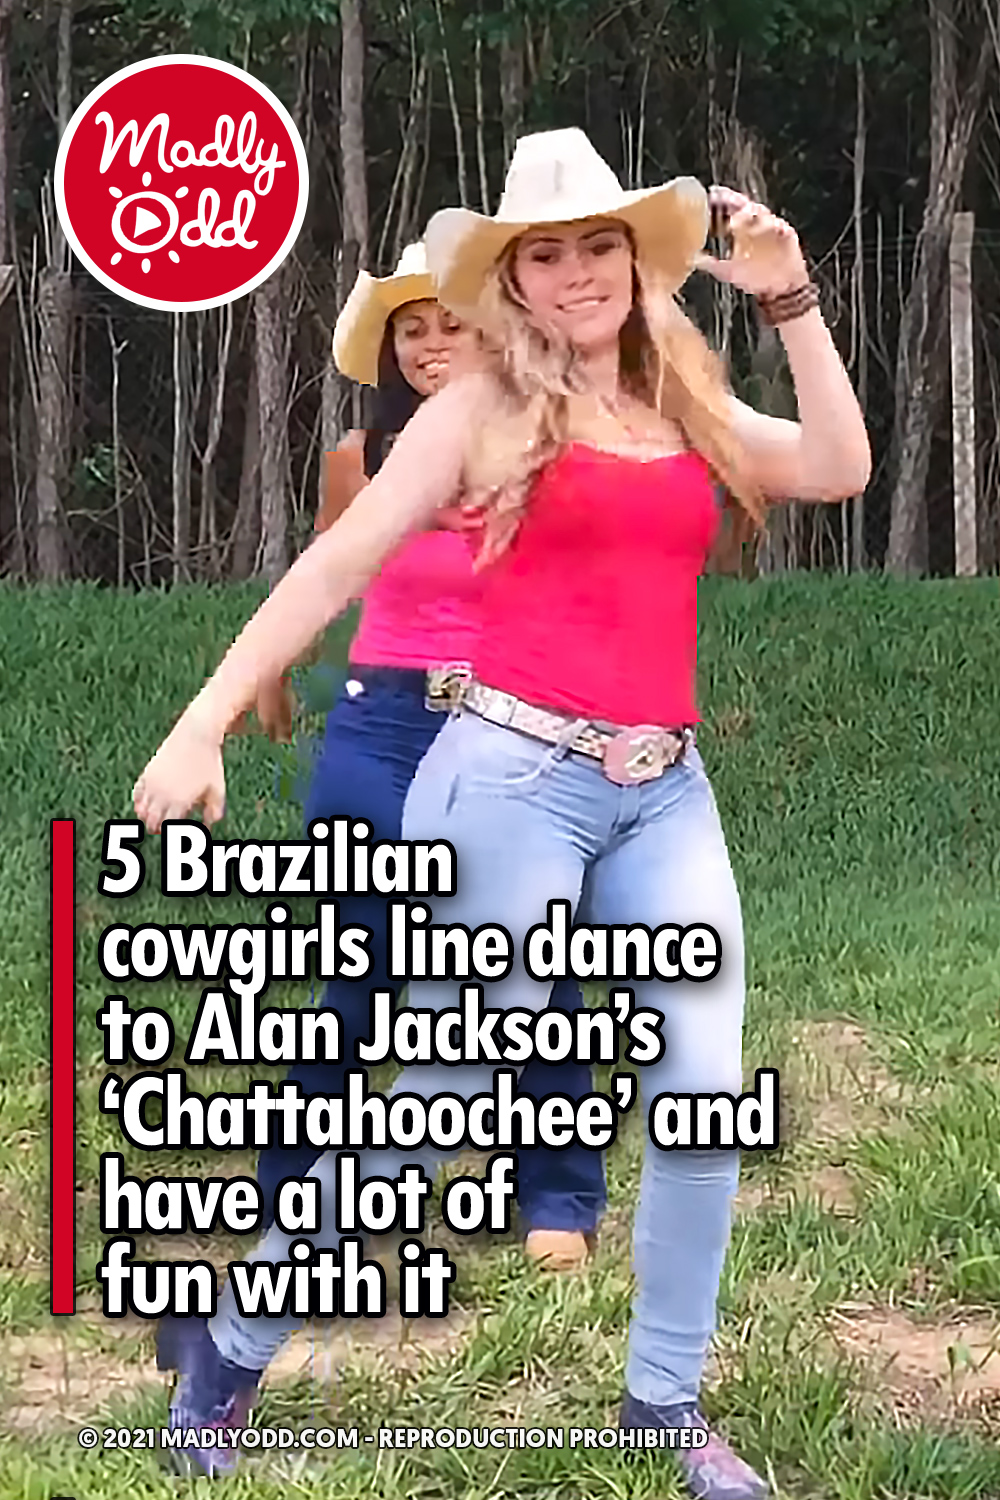 5 Brazilian cowgirls line dance to Alan Jackson’s ‘Chattahoochee’ and have a lot of fun with it